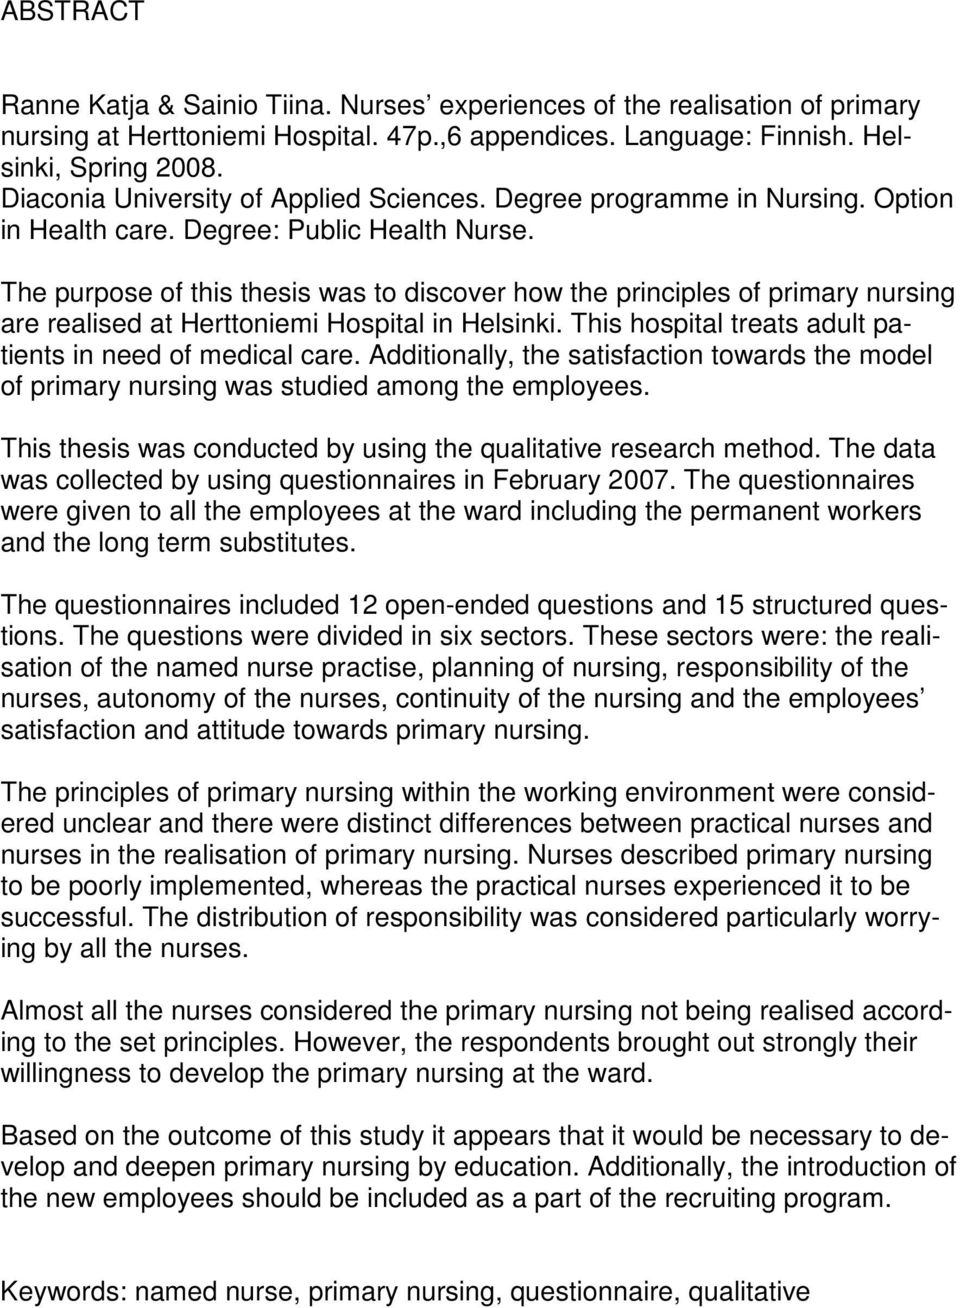 The purpose of this thesis was to discover how the principles of primary nursing are realised at Herttoniemi Hospital in Helsinki. This hospital treats adult patients in need of medical care.